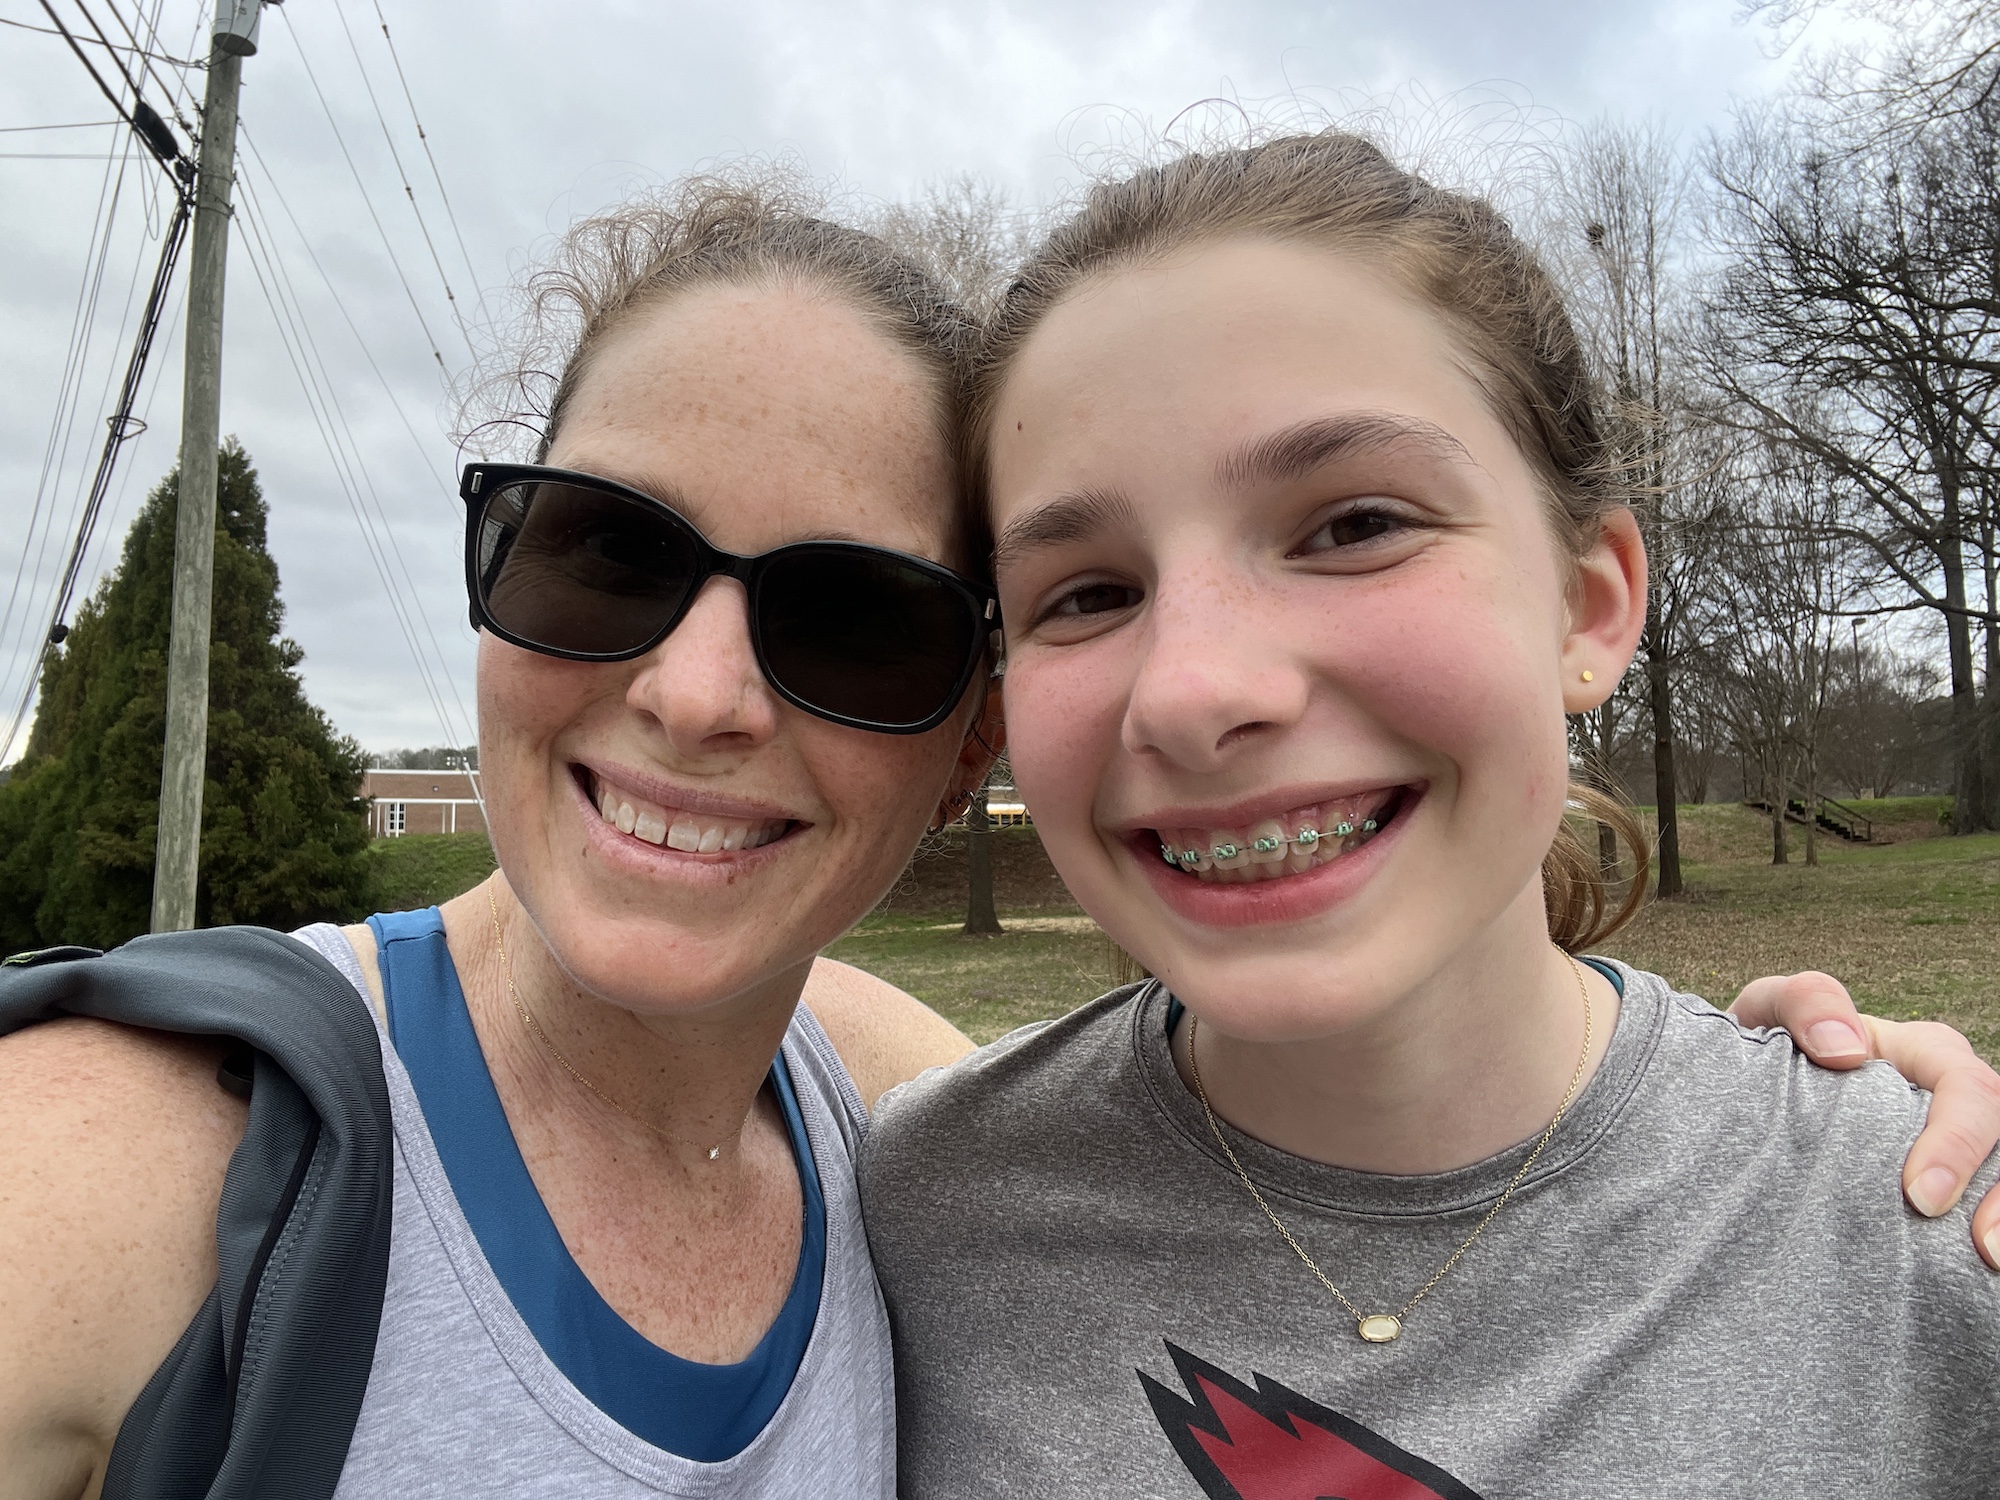 post-run together during the week with e mommy and me monday